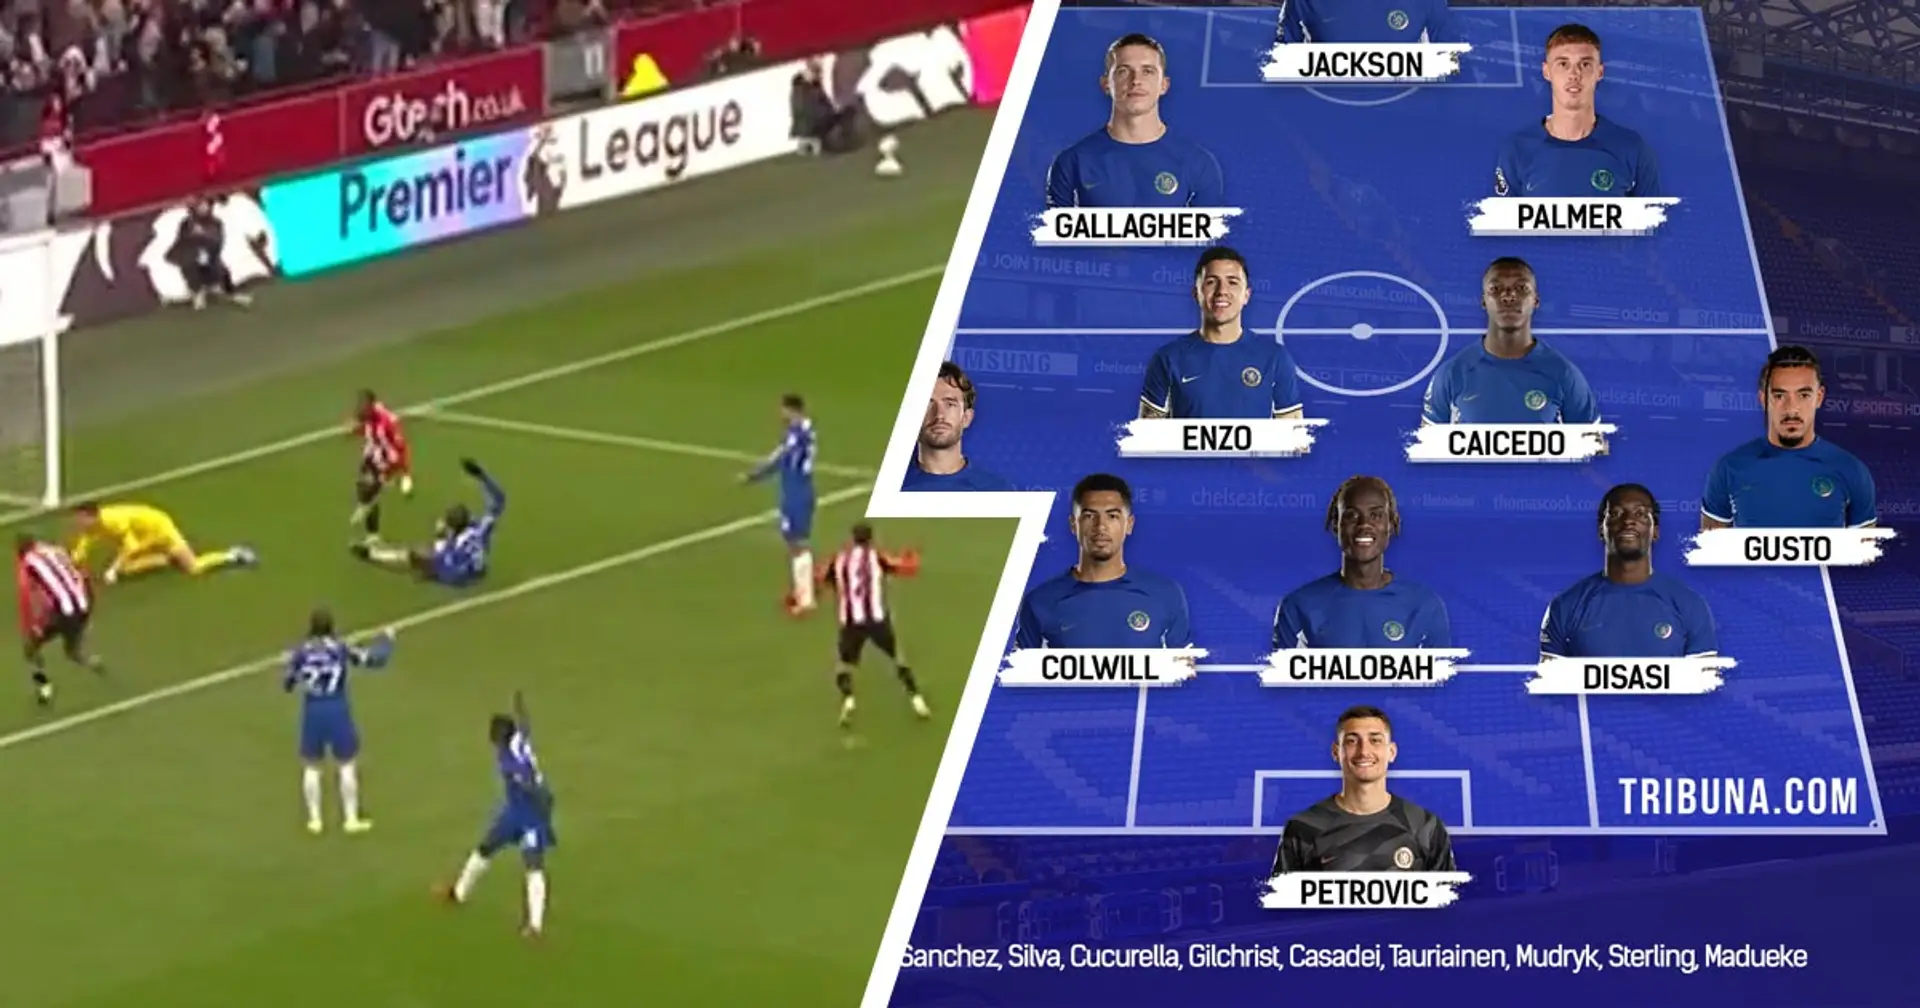 'All I'm going to say': fans call for one defender as Chelsea concede sloppy goal